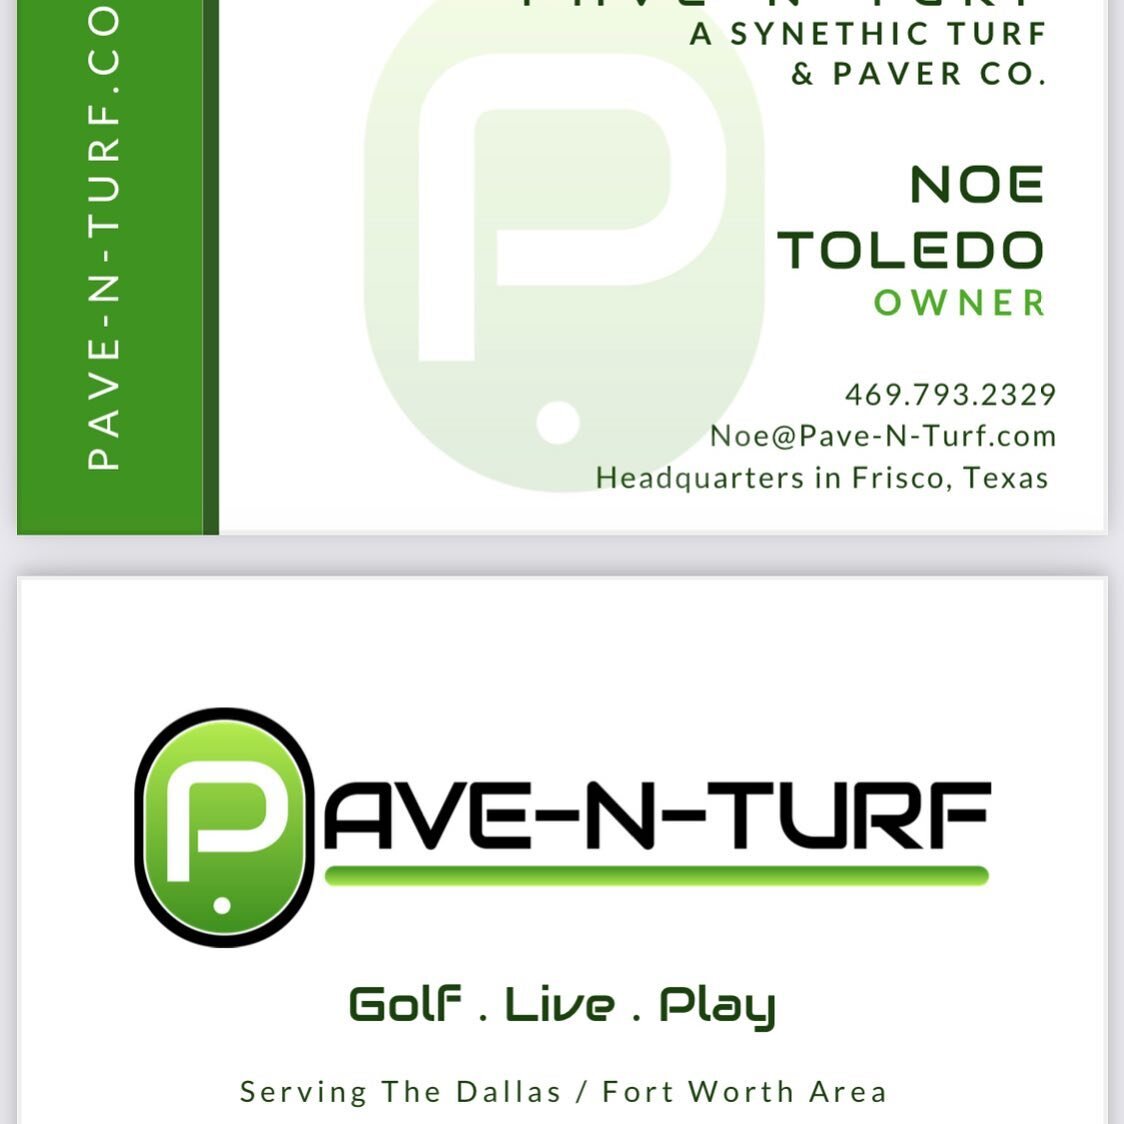 BUSINESS CARDS.....

These are still a relevant and important piece of your marketing collateral. 

Pave-N-Turf is ready to make that first great impression with potential clients with their new cards. 

👉 We handle all your design and print needs. 